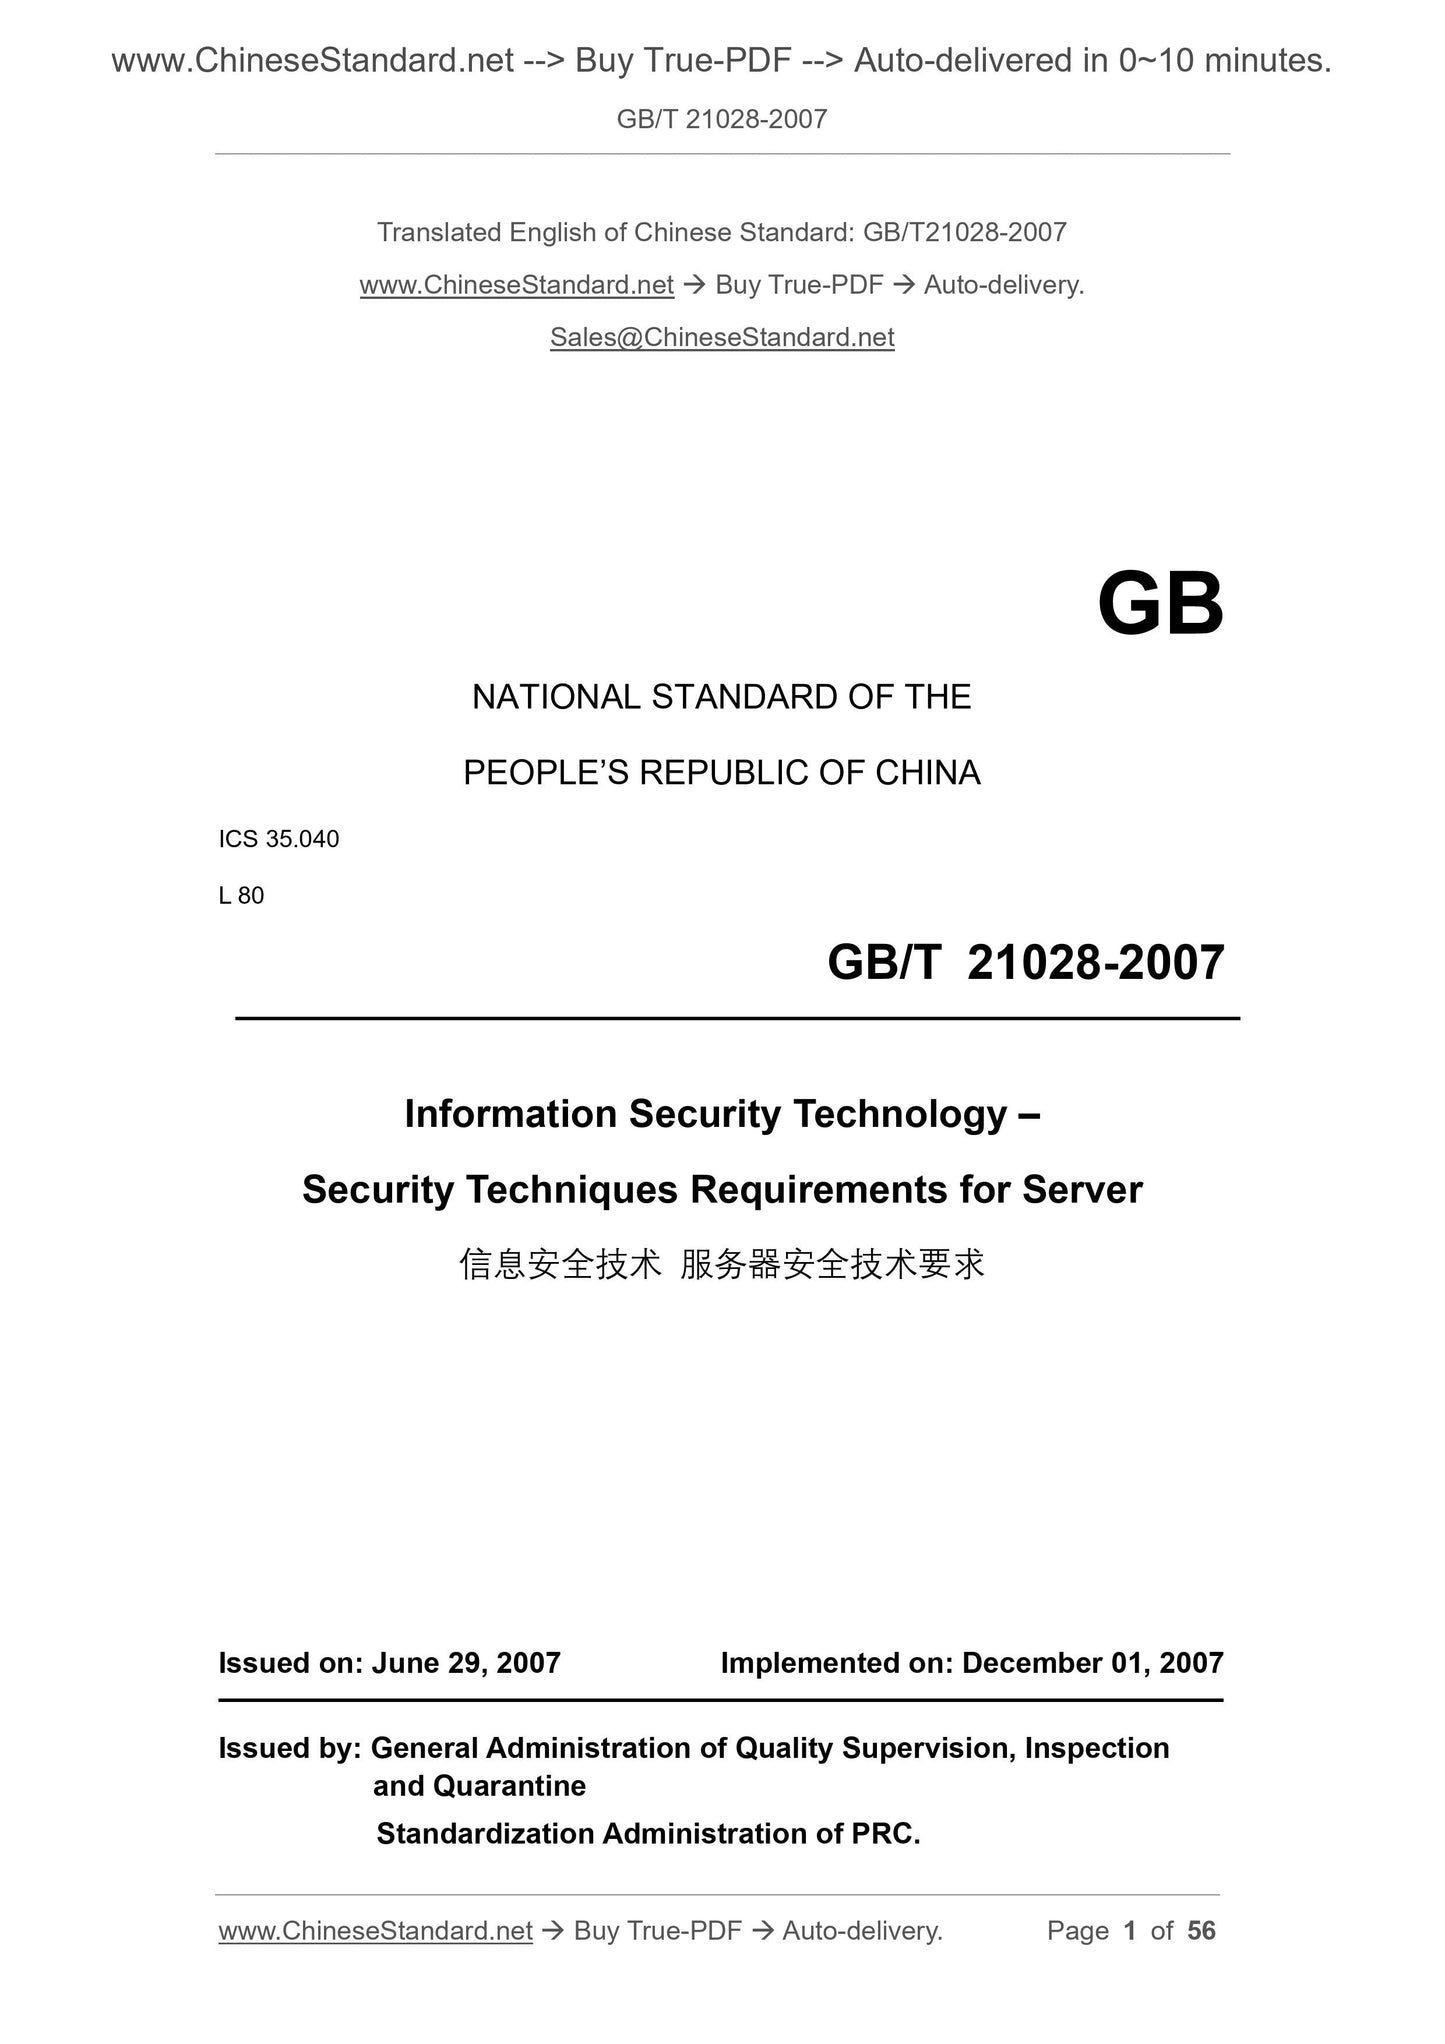 GB/T 21028-2007 Page 1